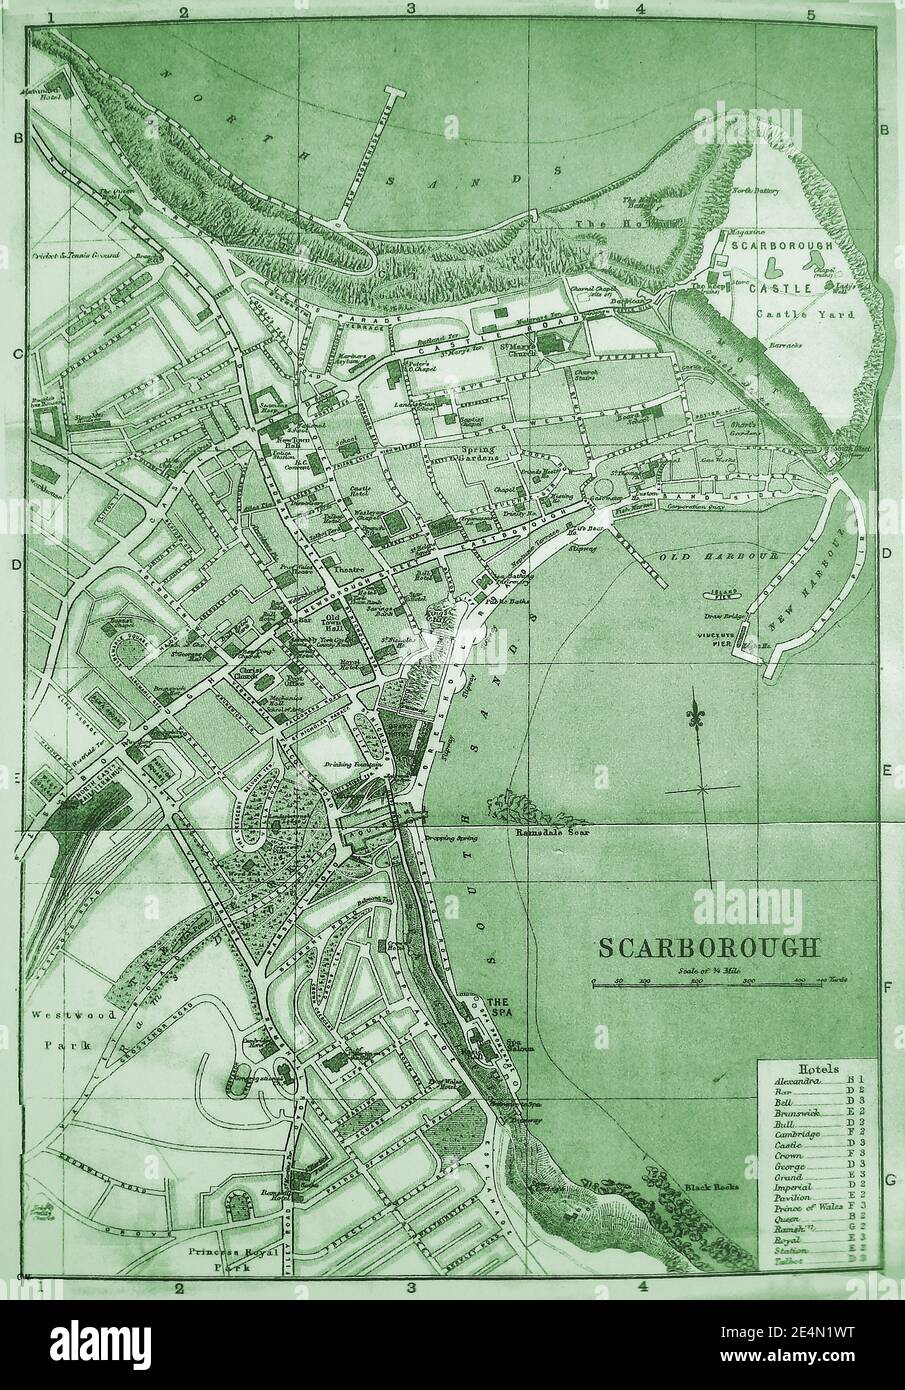 An 1890 street map of Scarborough, North Yorkshire, UK. Stock Photo